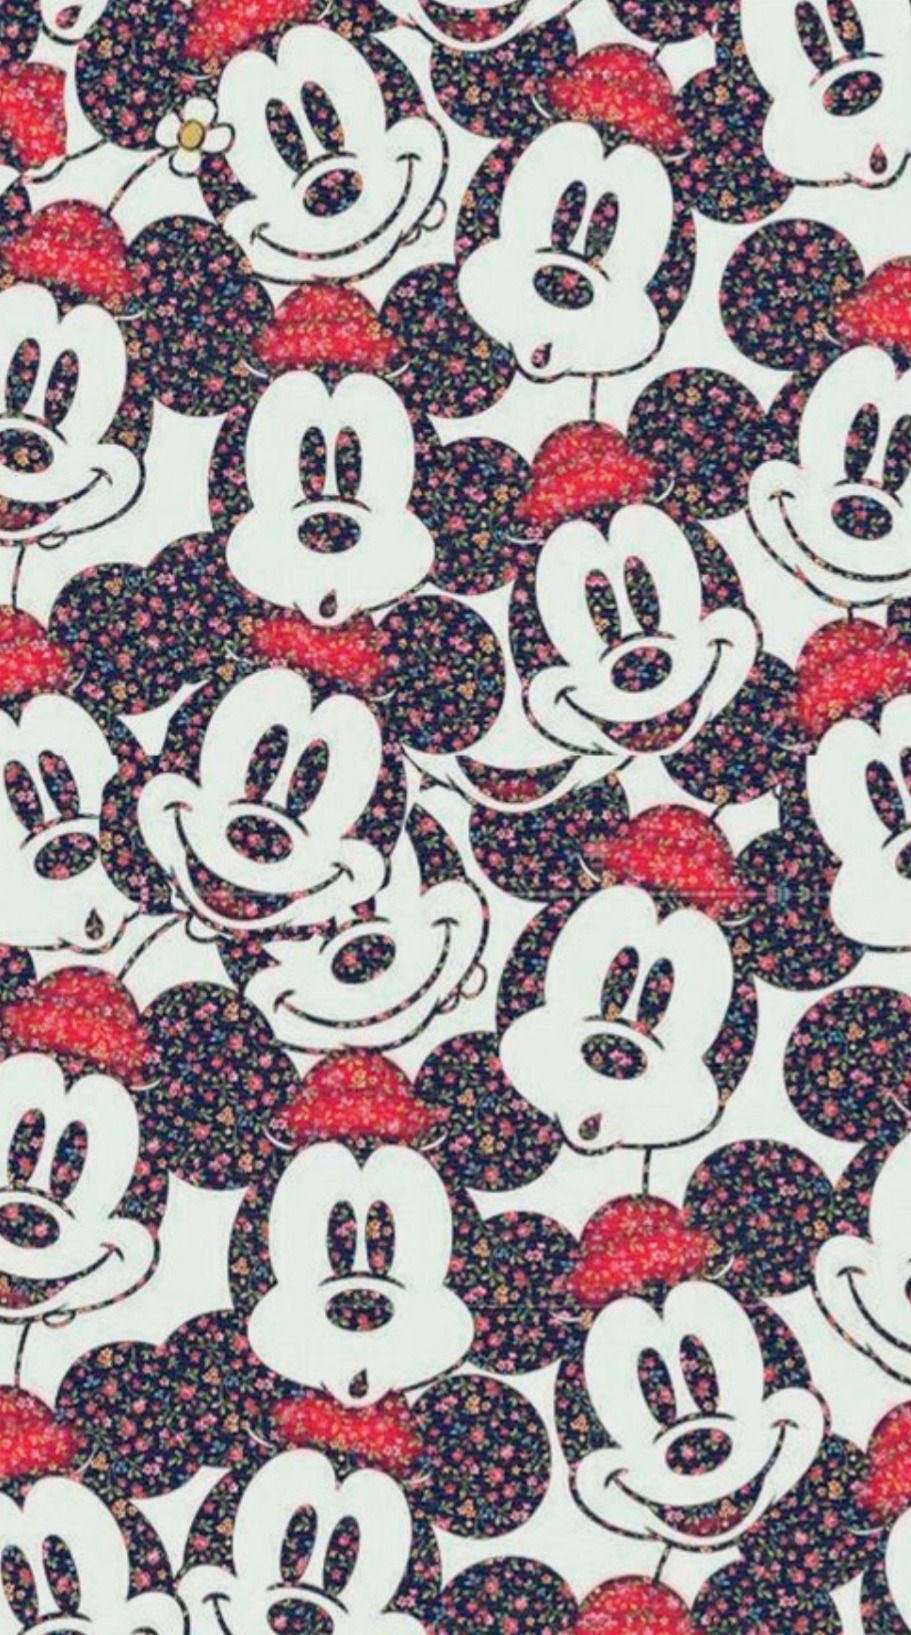 Mickey Mouse Tumblr Wallpaper Free Mickey Mouse Tumblr Background